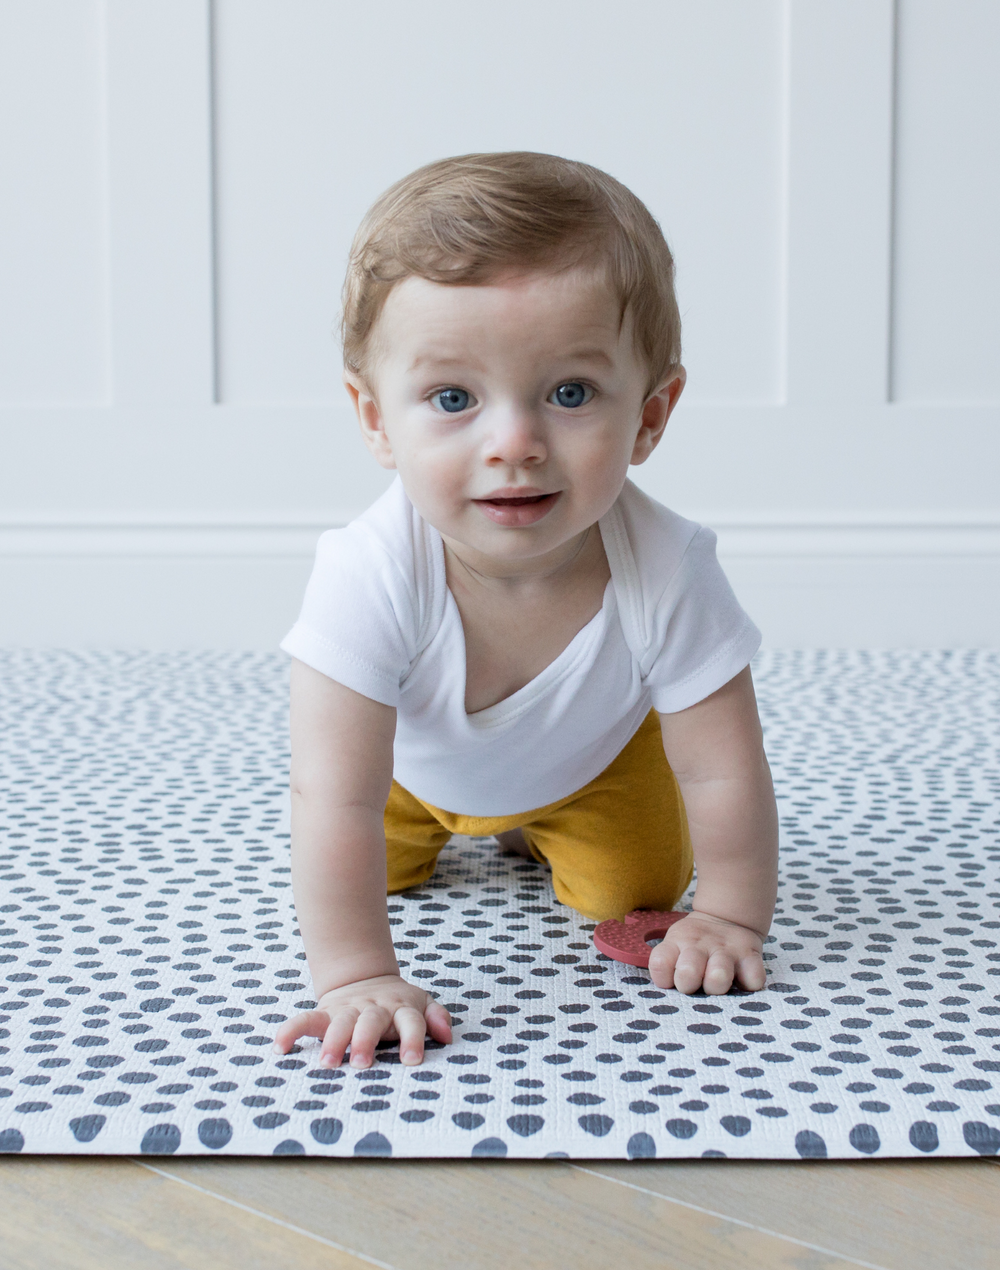 Babies hands press down on a resilient memory foam baby play mat